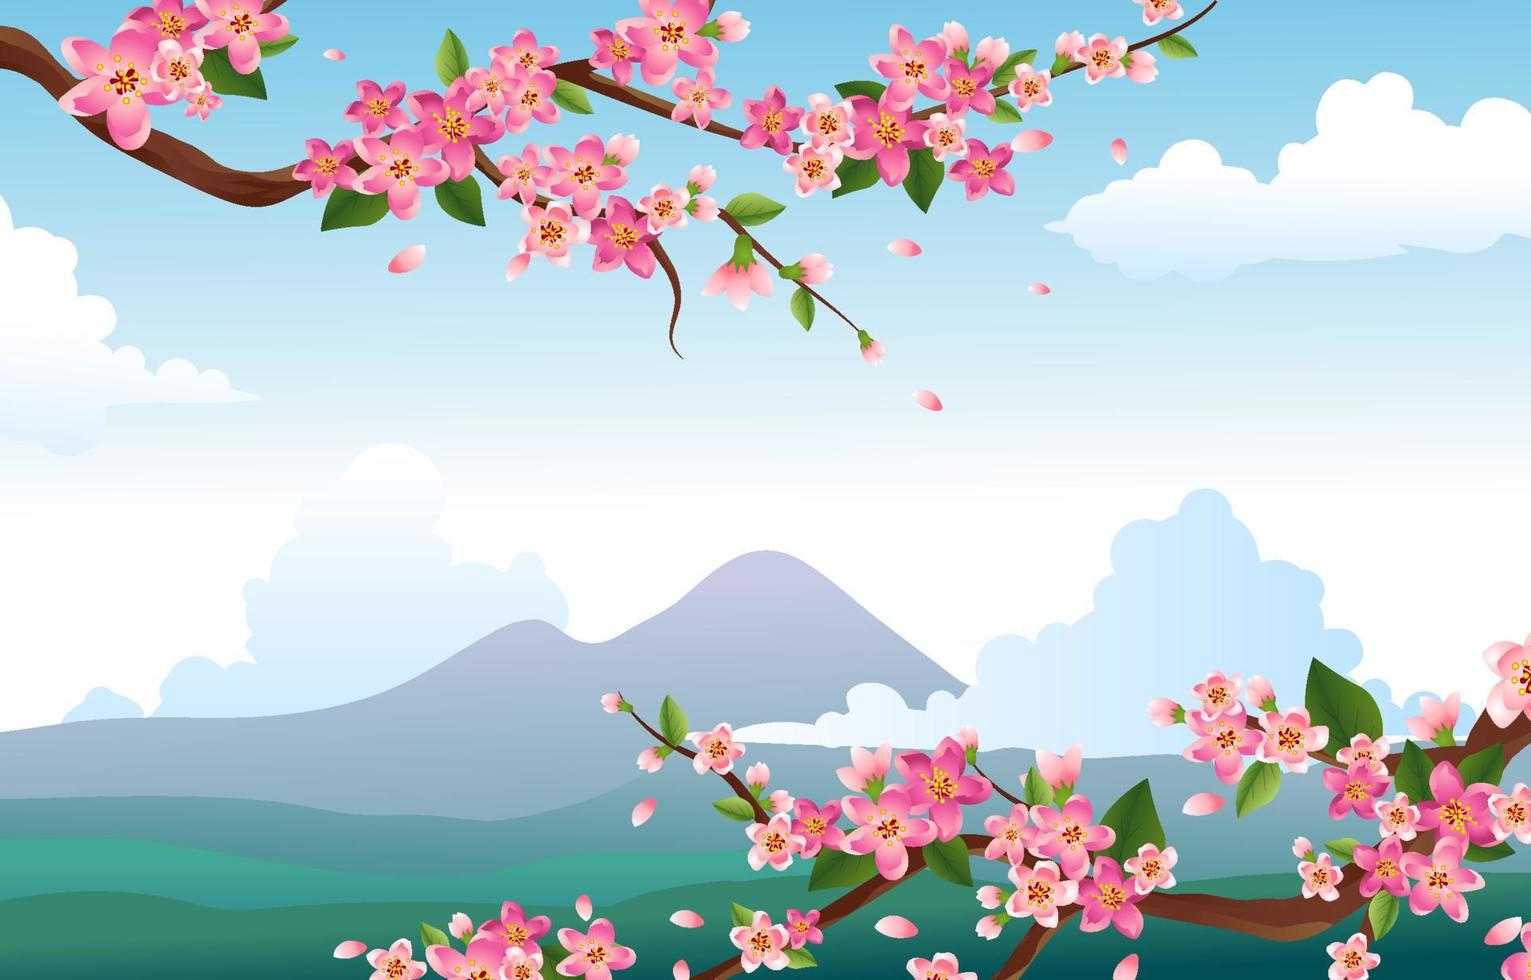 Peach Blossom With Landscape Background vector